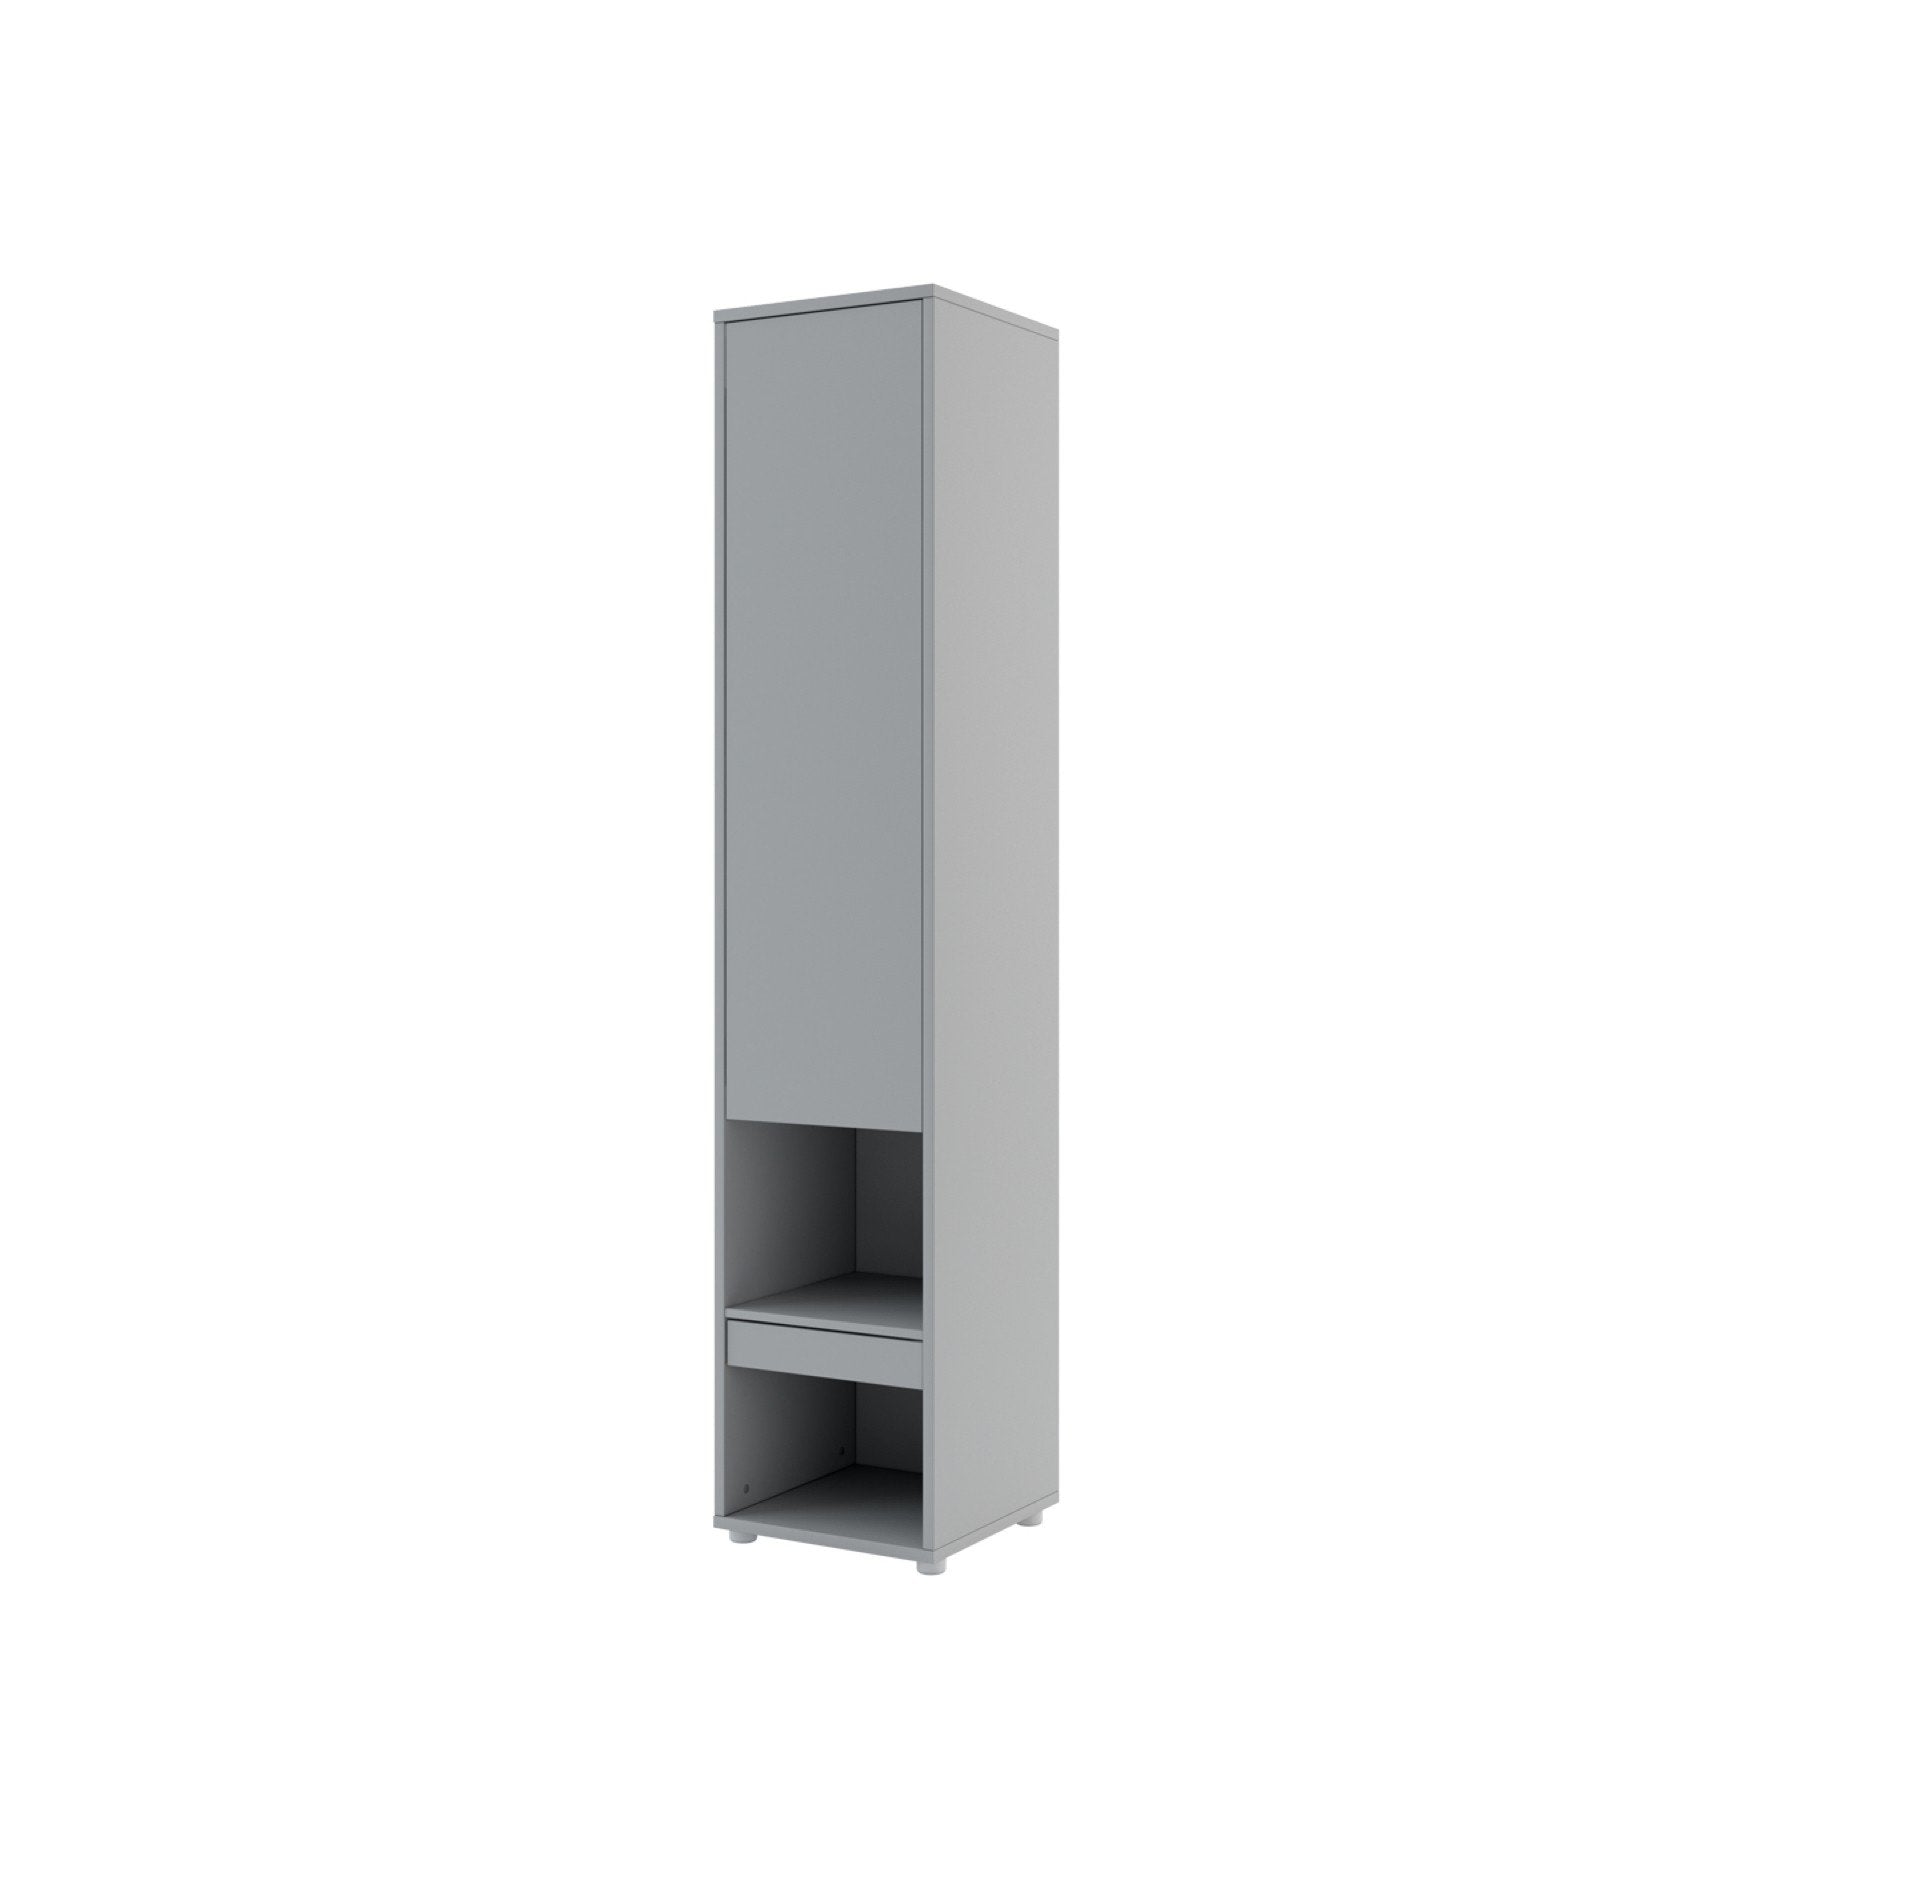 View BC07 Tall Storage Cabinet for Vertical Wall Bed Concept Murphy Bed Grey Matt 45cm information